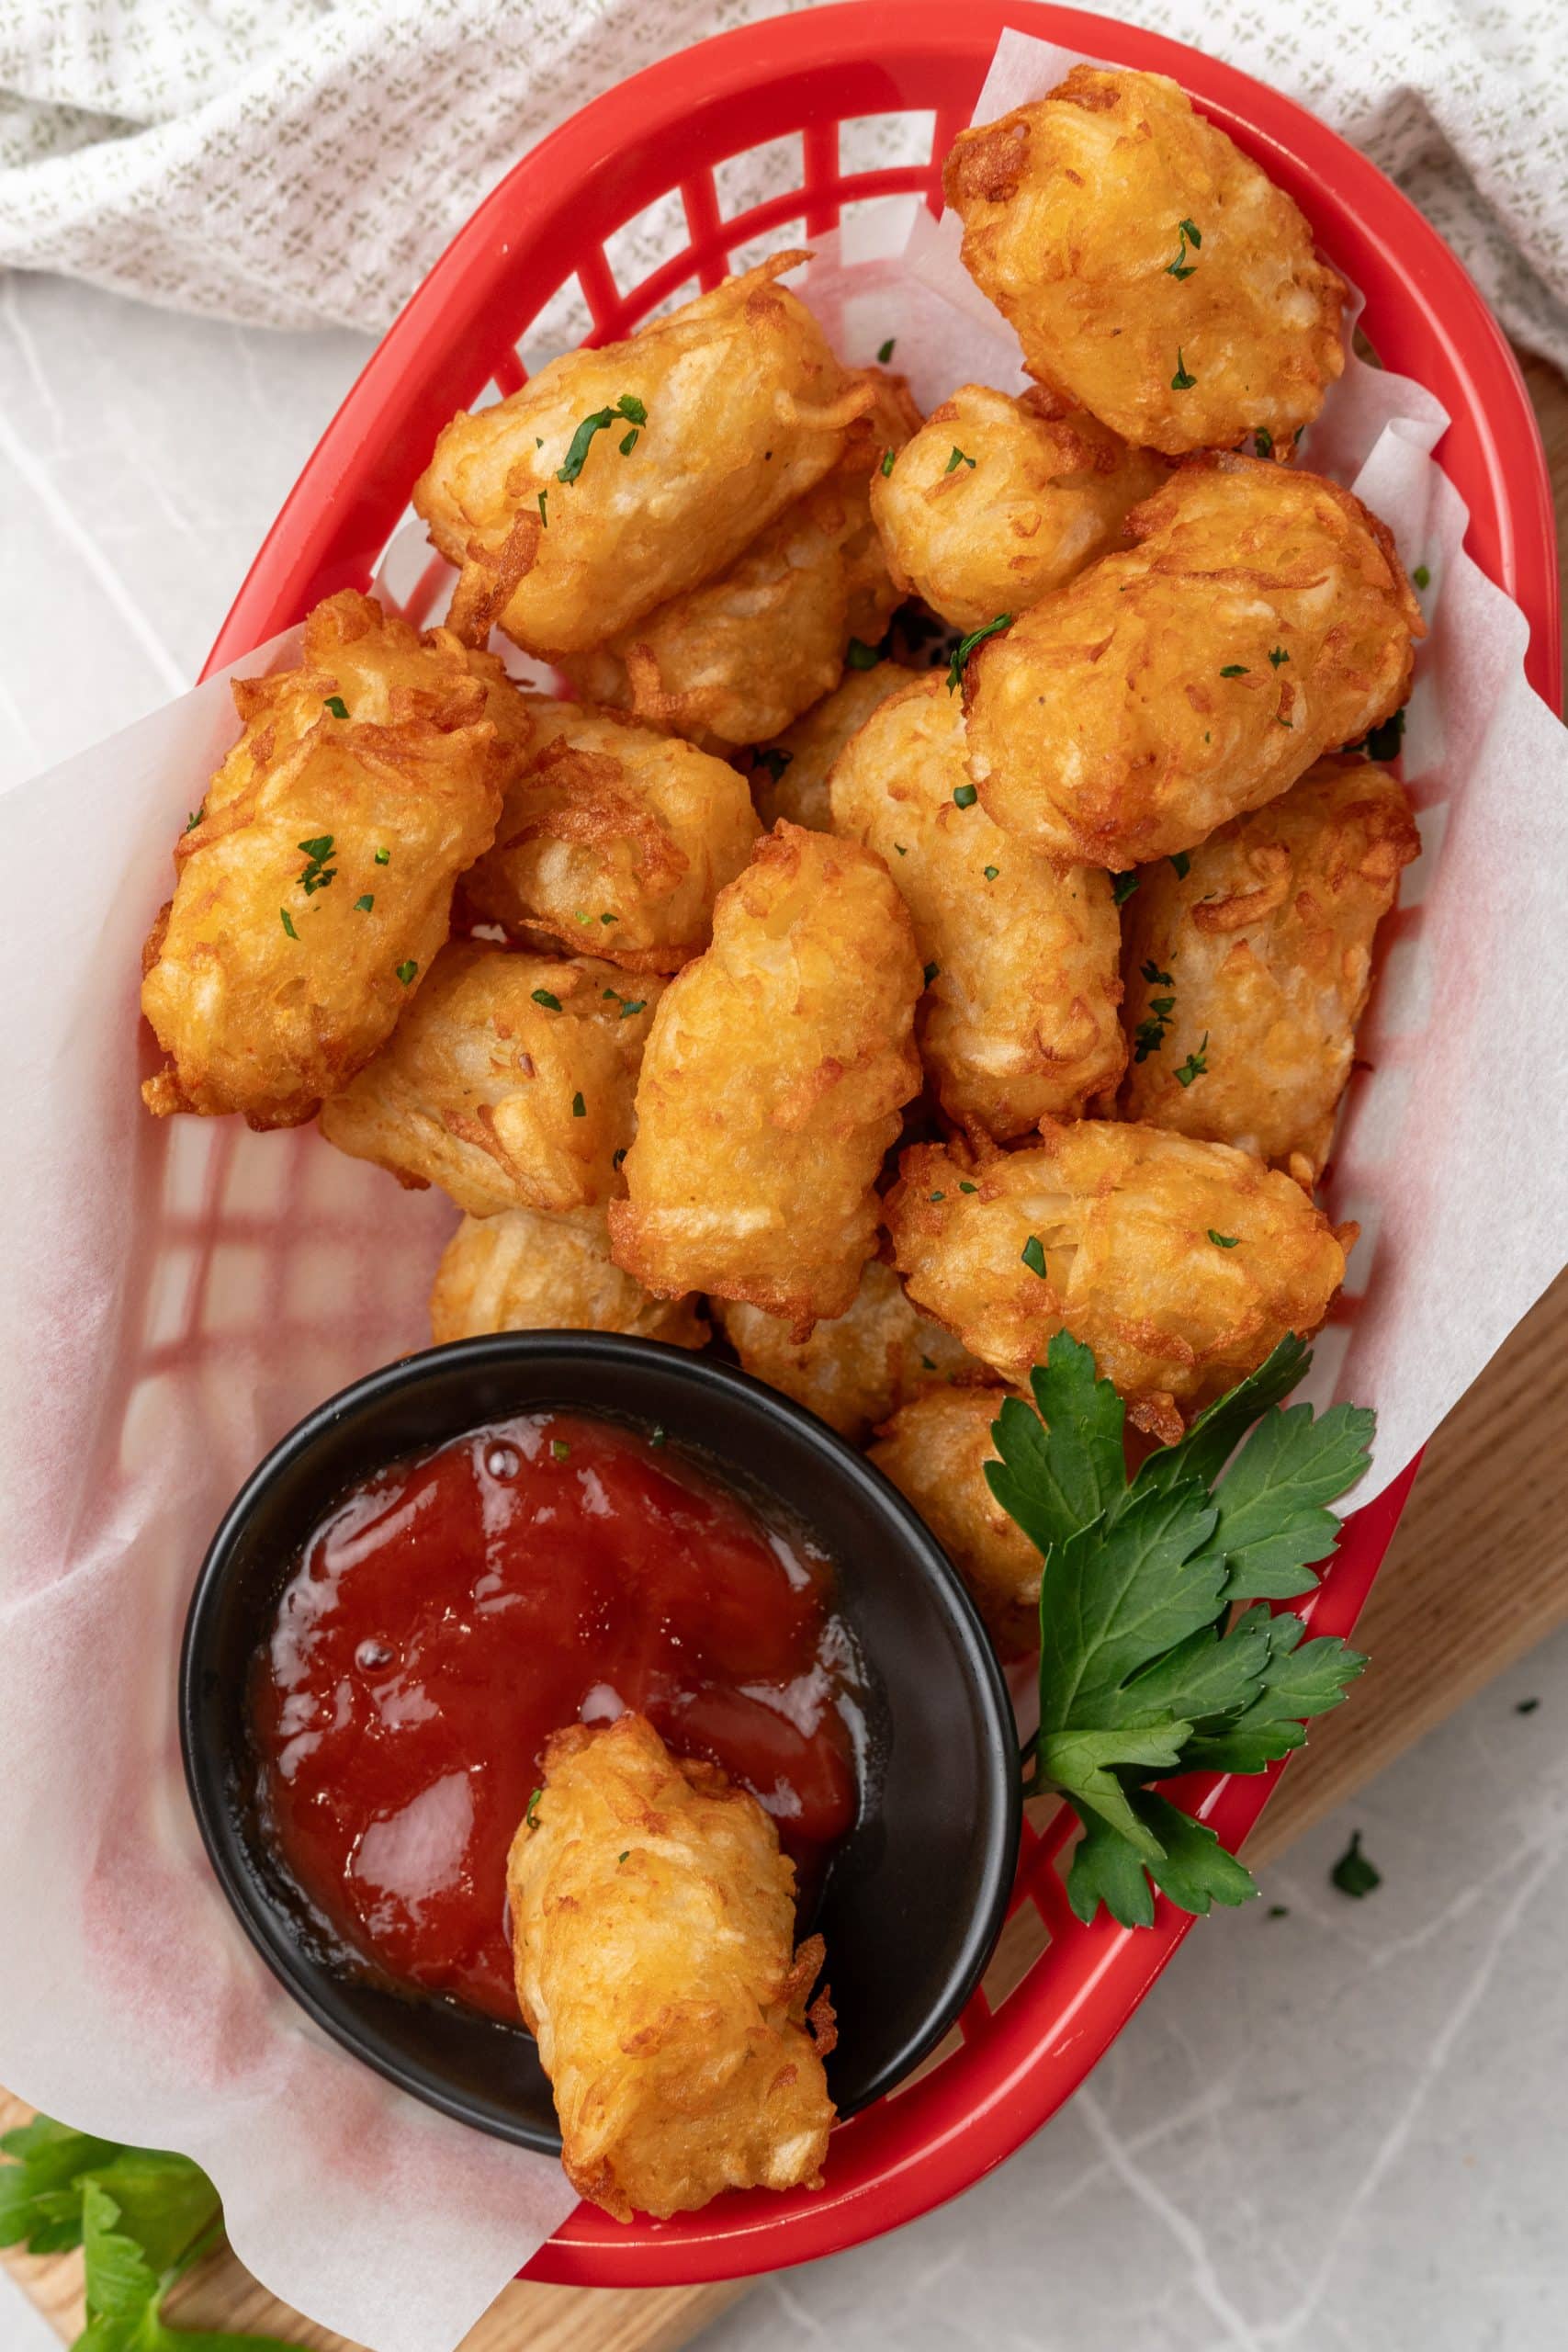 homemade tater tots in a red plastic basket with a cup of ketchup on the side